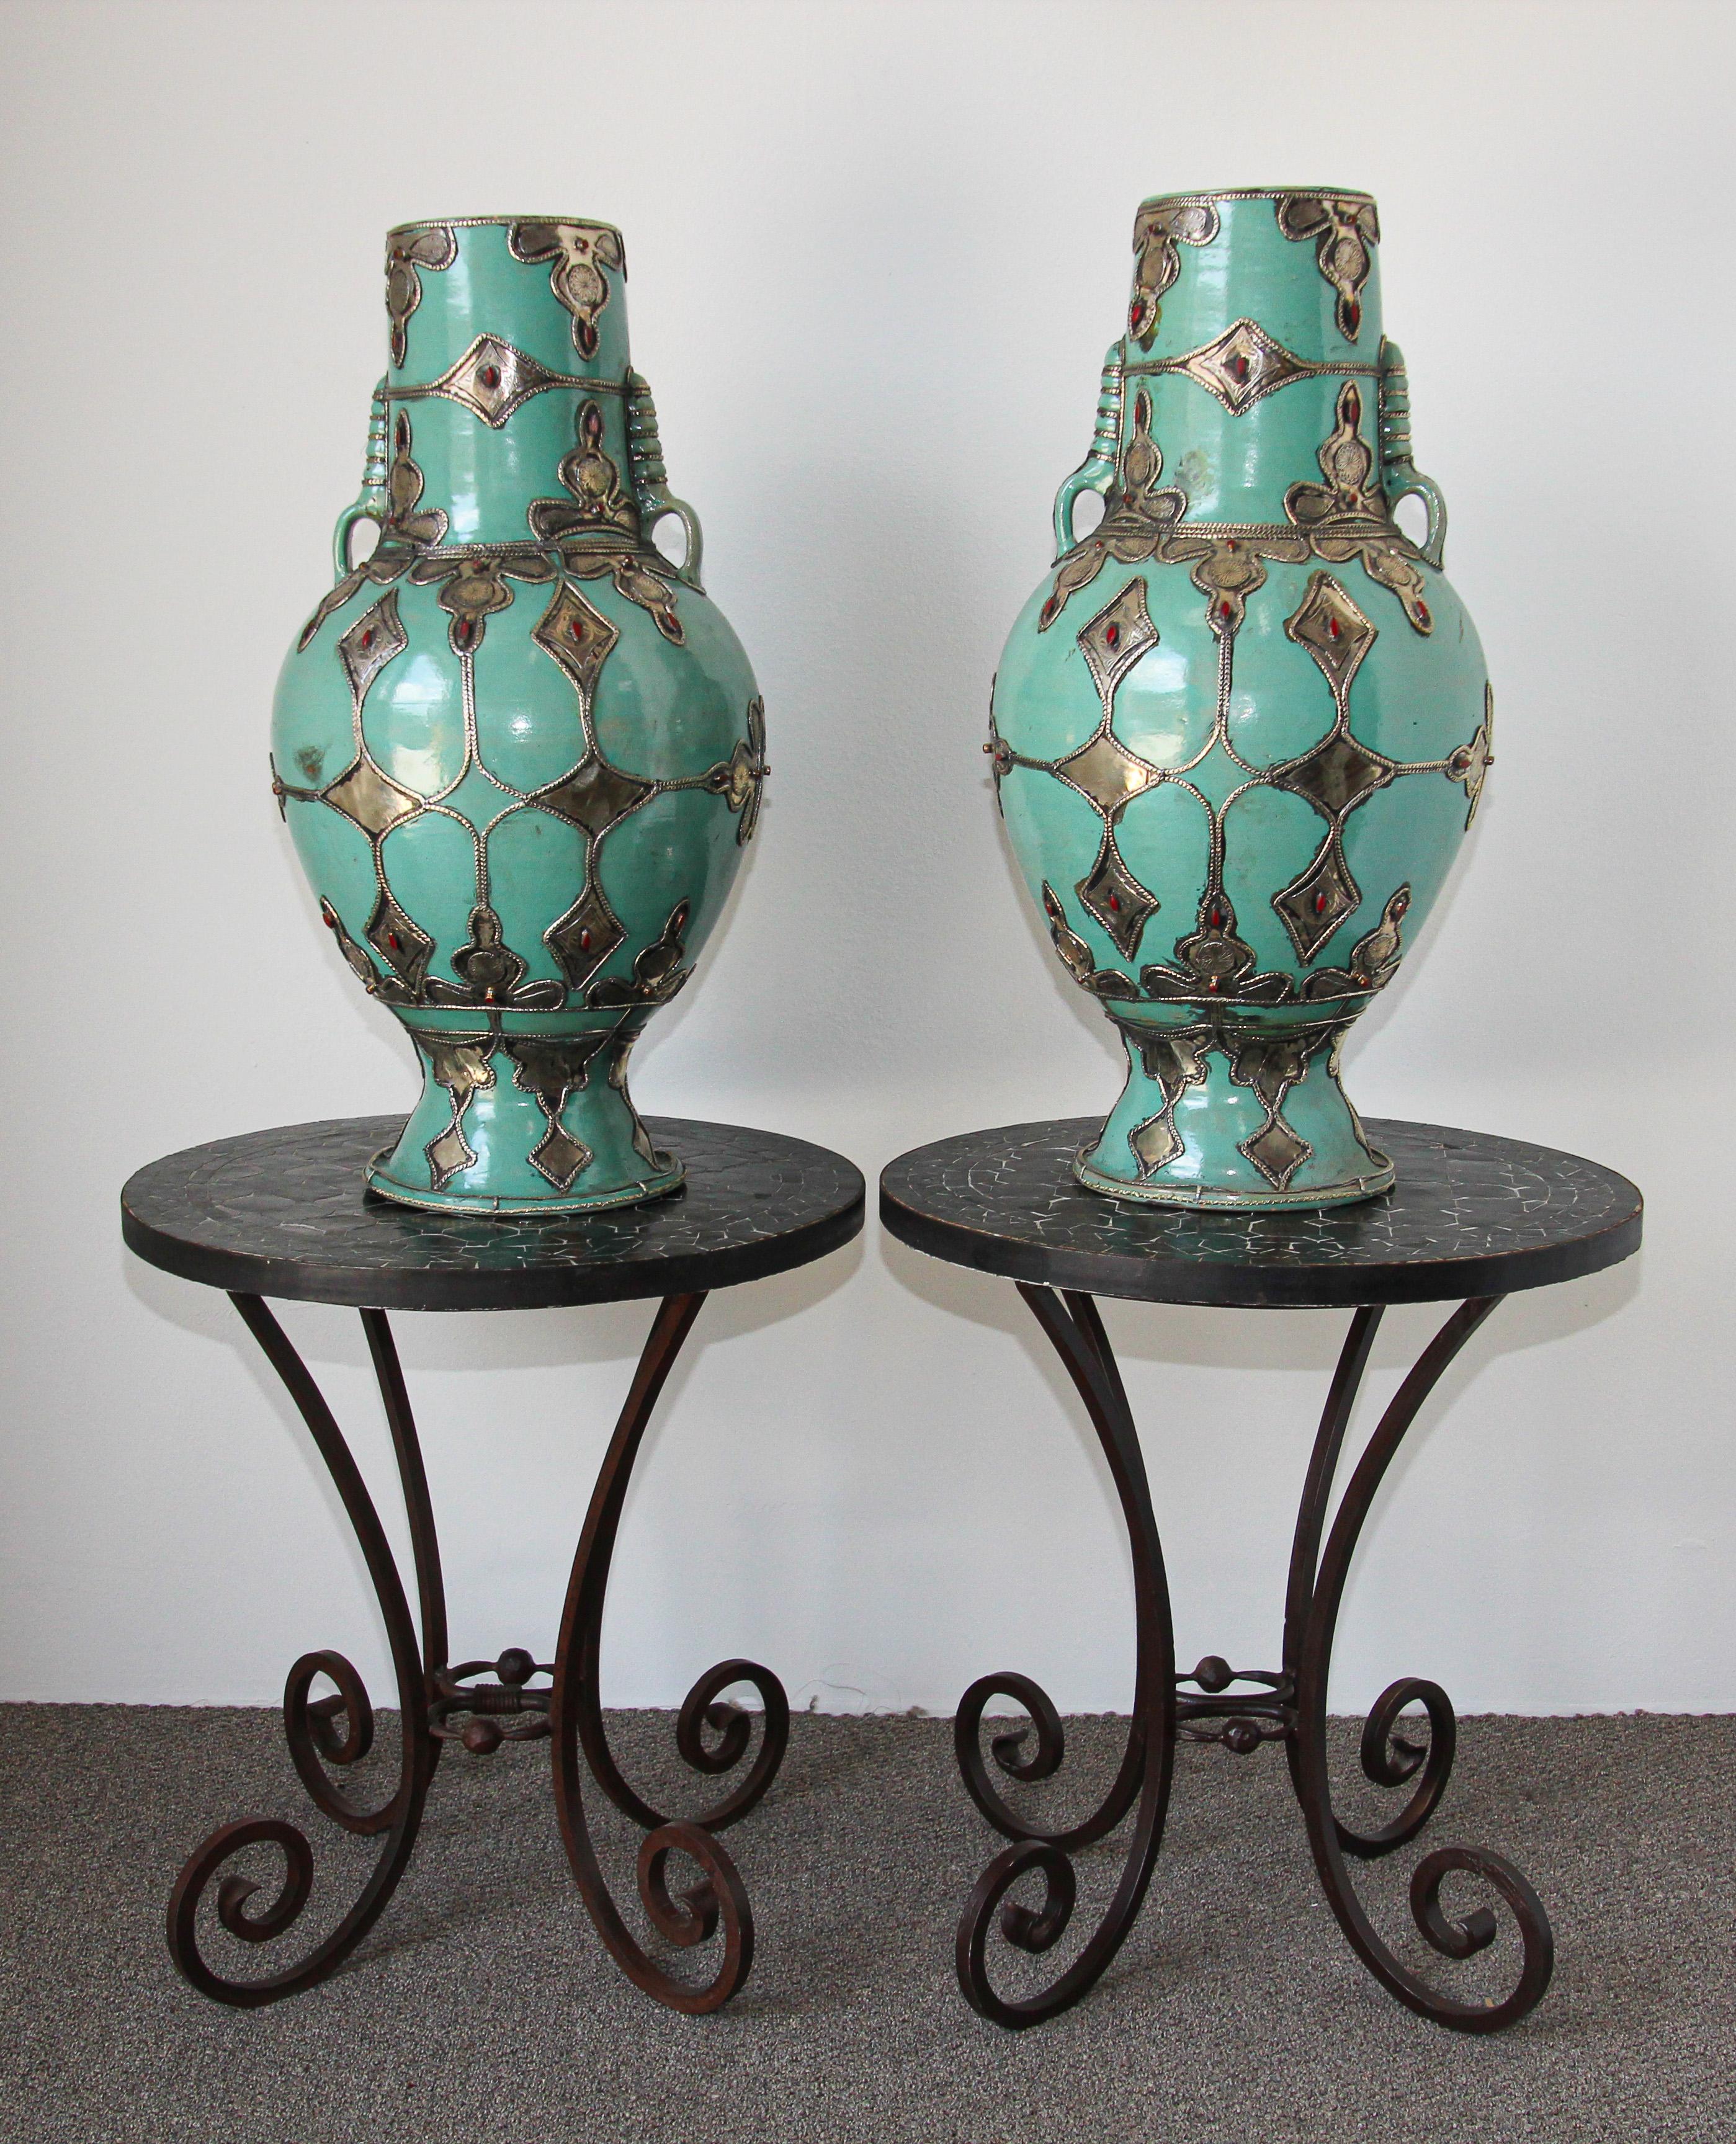 Moroccan Handcrafted Large Moorish Ceramic Vases with Handles